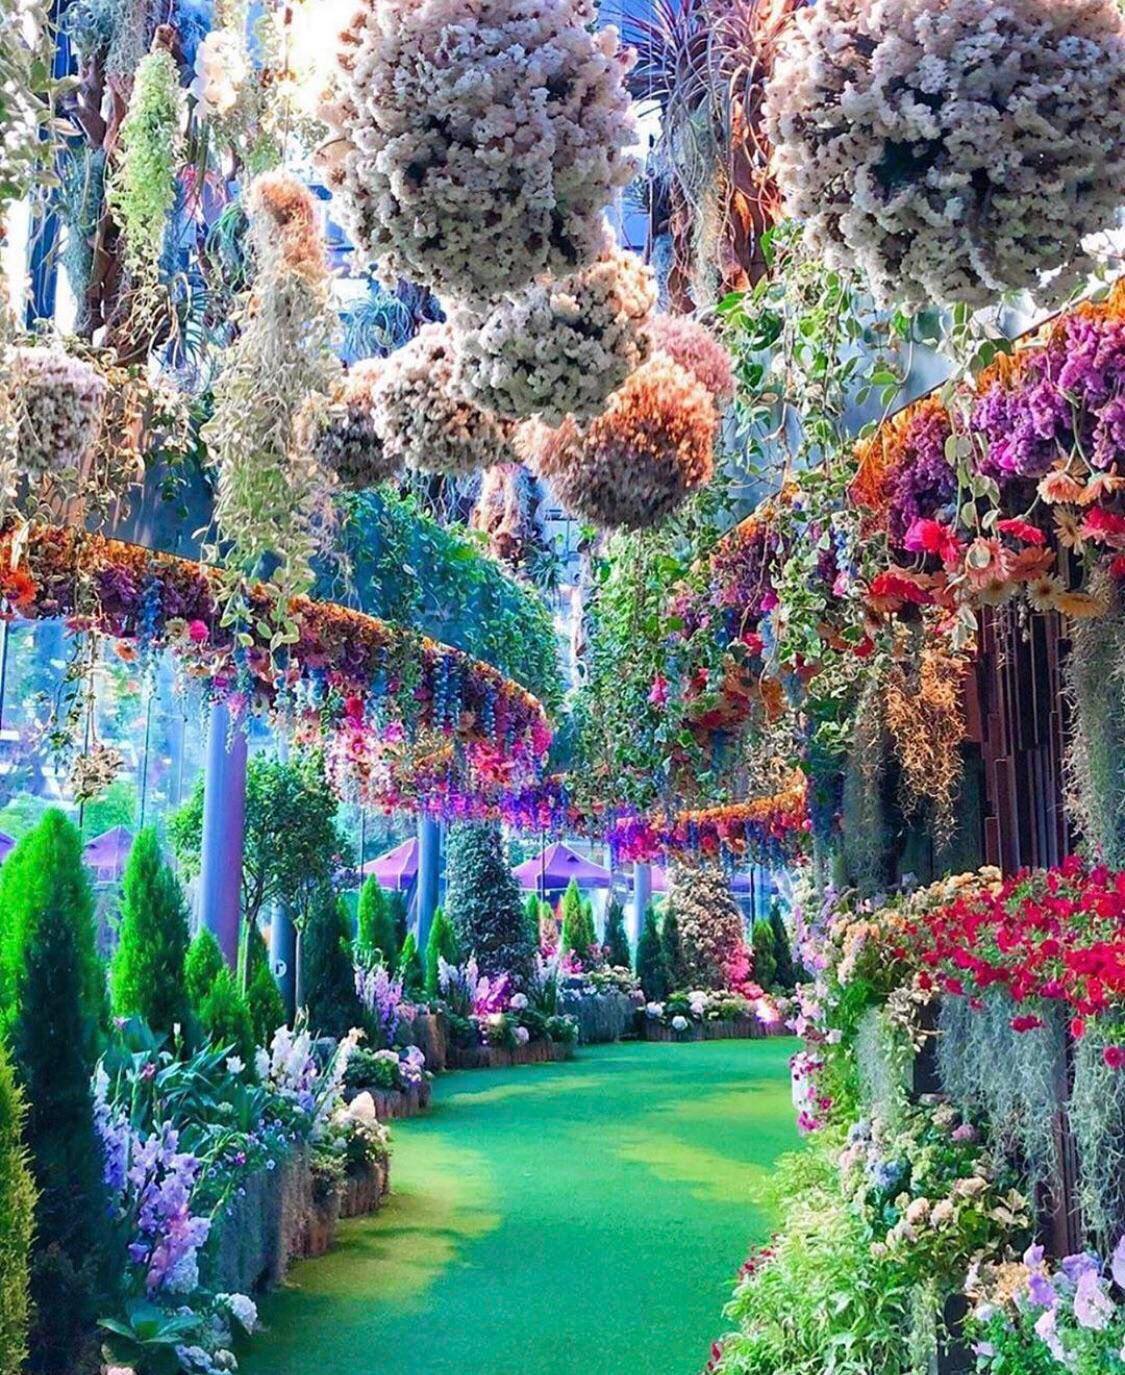 These Gardens in Singapore